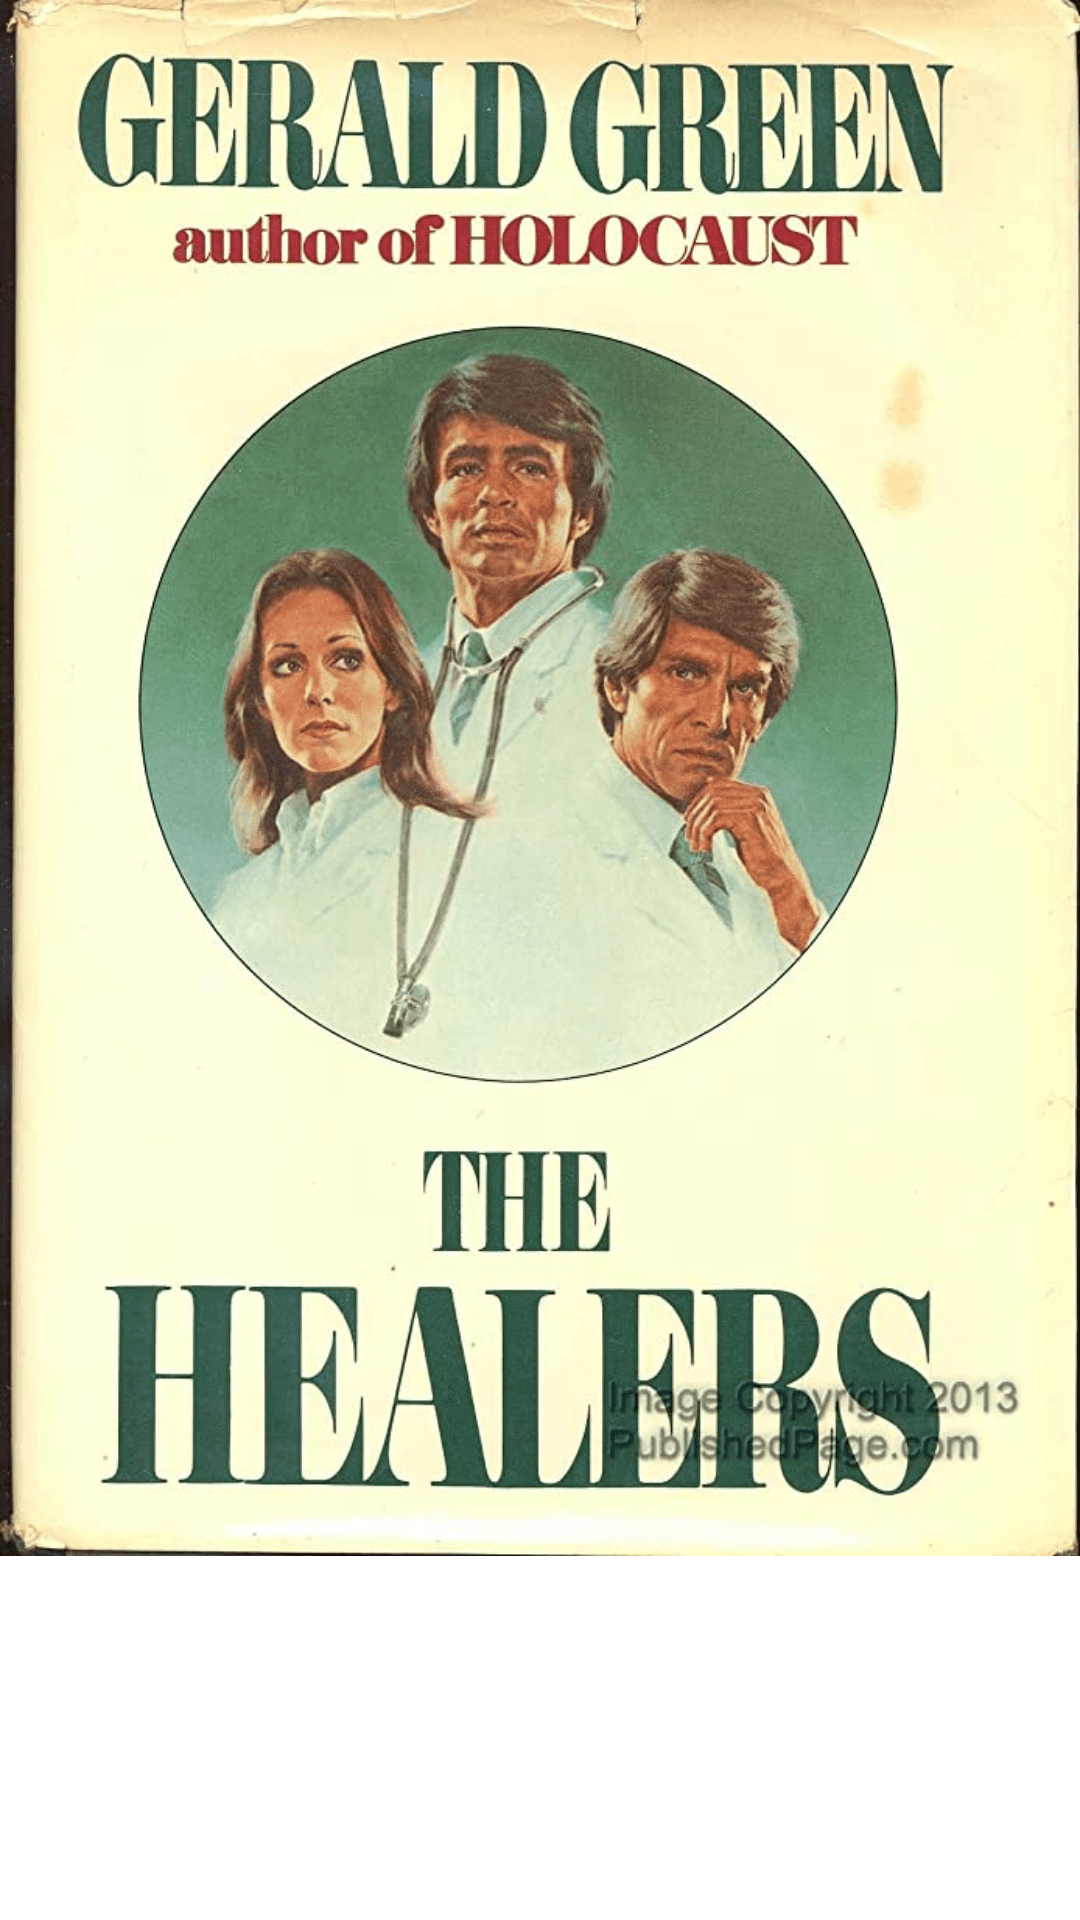 The Healers by Gerald Green